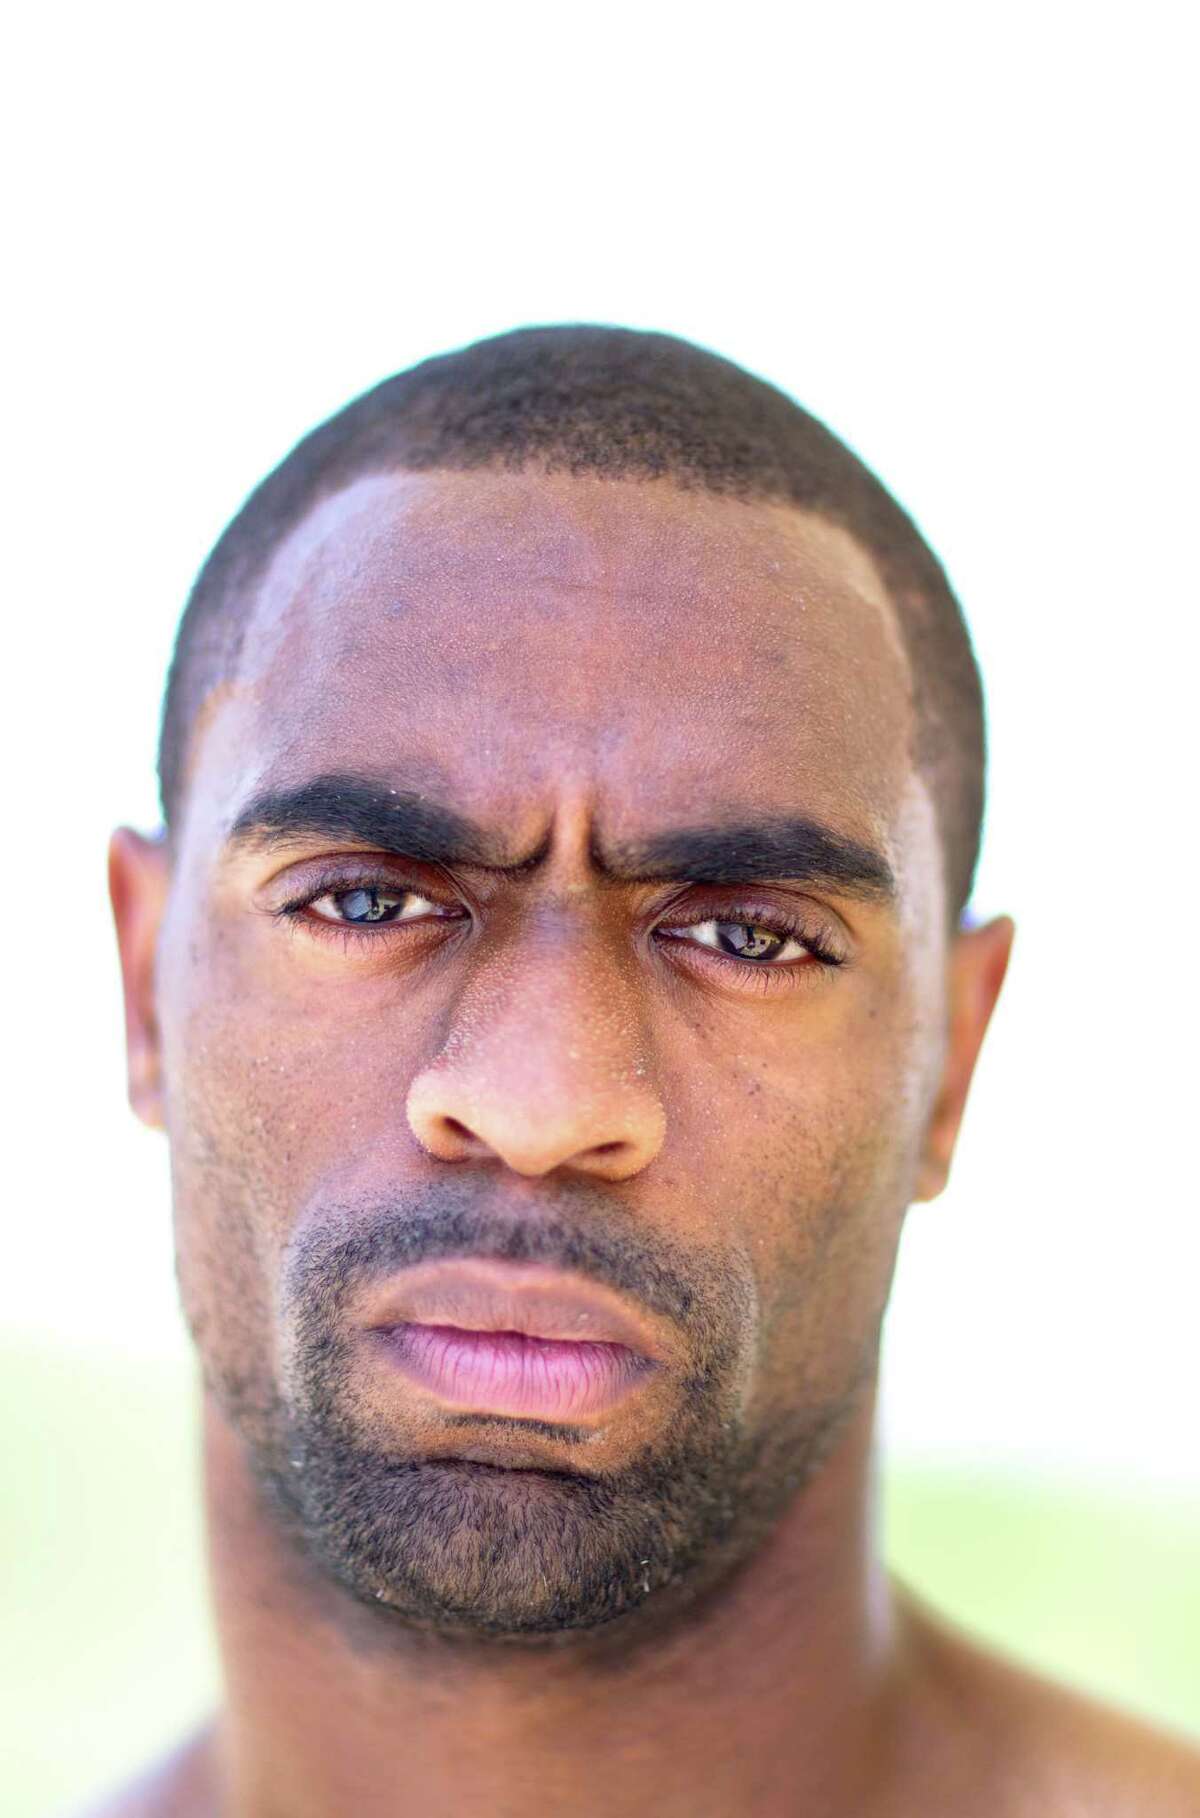 FILE - JULY 14, 2013: It was reported that sprinter Tyson Gay has tested positive for a banned substance and has pulled out of next month's World Championships July 14, 2013. CLERMONT, FL - JUNE 14: Olympic sprinter Tyson Gay of the United States of America poses for a portrait at the National Training Center on June 14, 2010 in Clermont, Florida. (Photo by Al Bello/Getty Images) ORG XMIT: 98939322